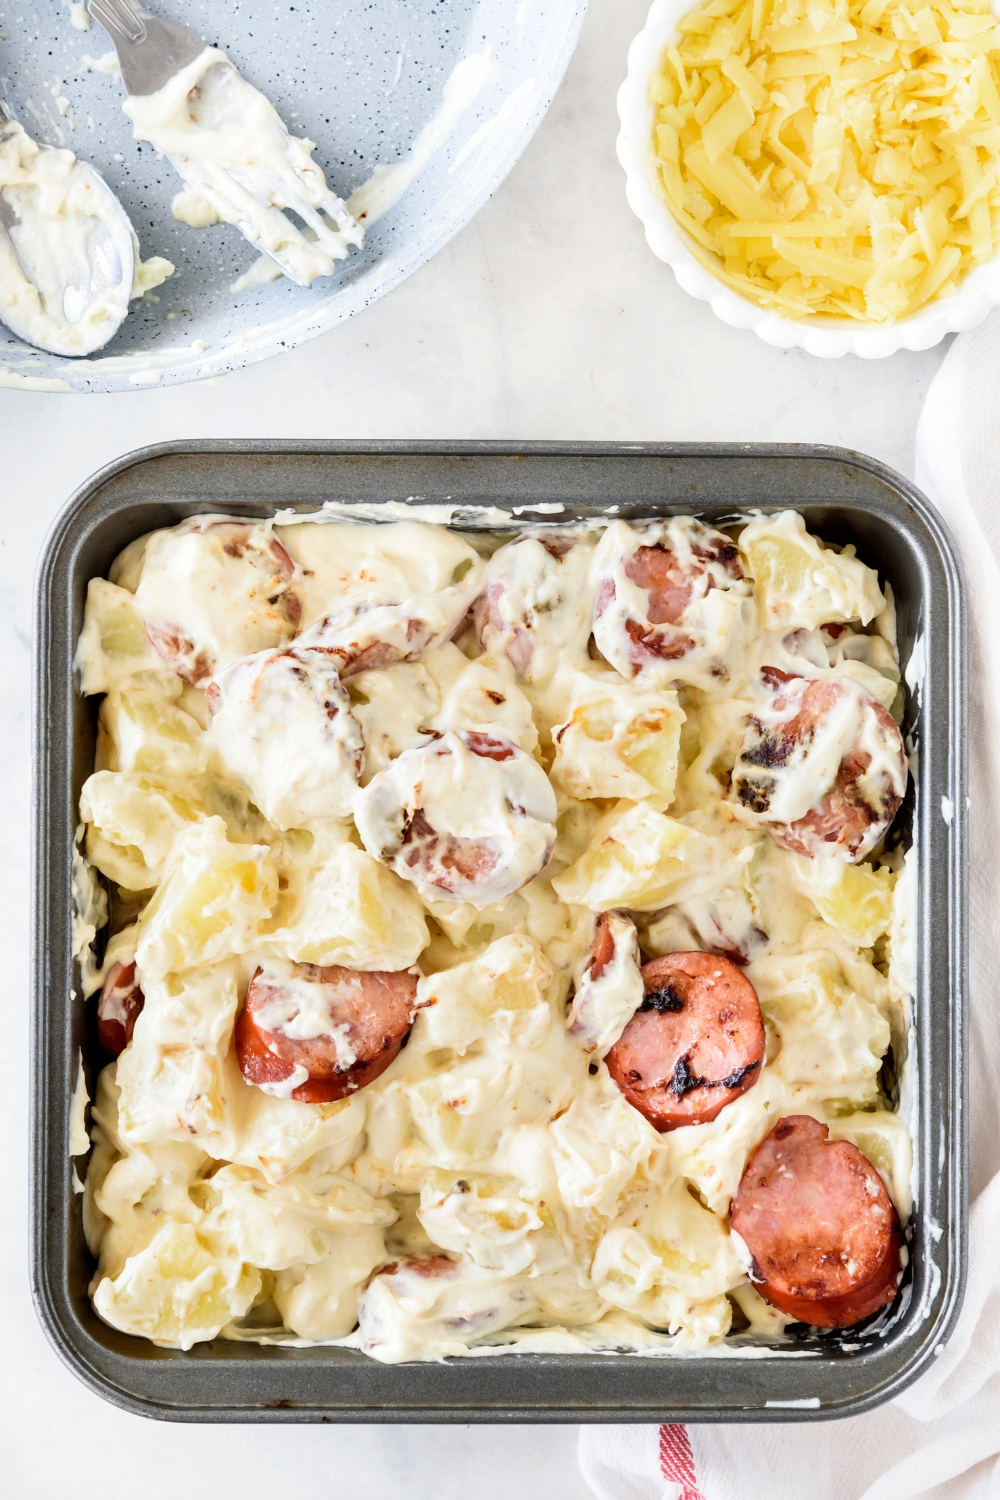 A baking dish filled with sausages and potatoes covered in a cream sauce.